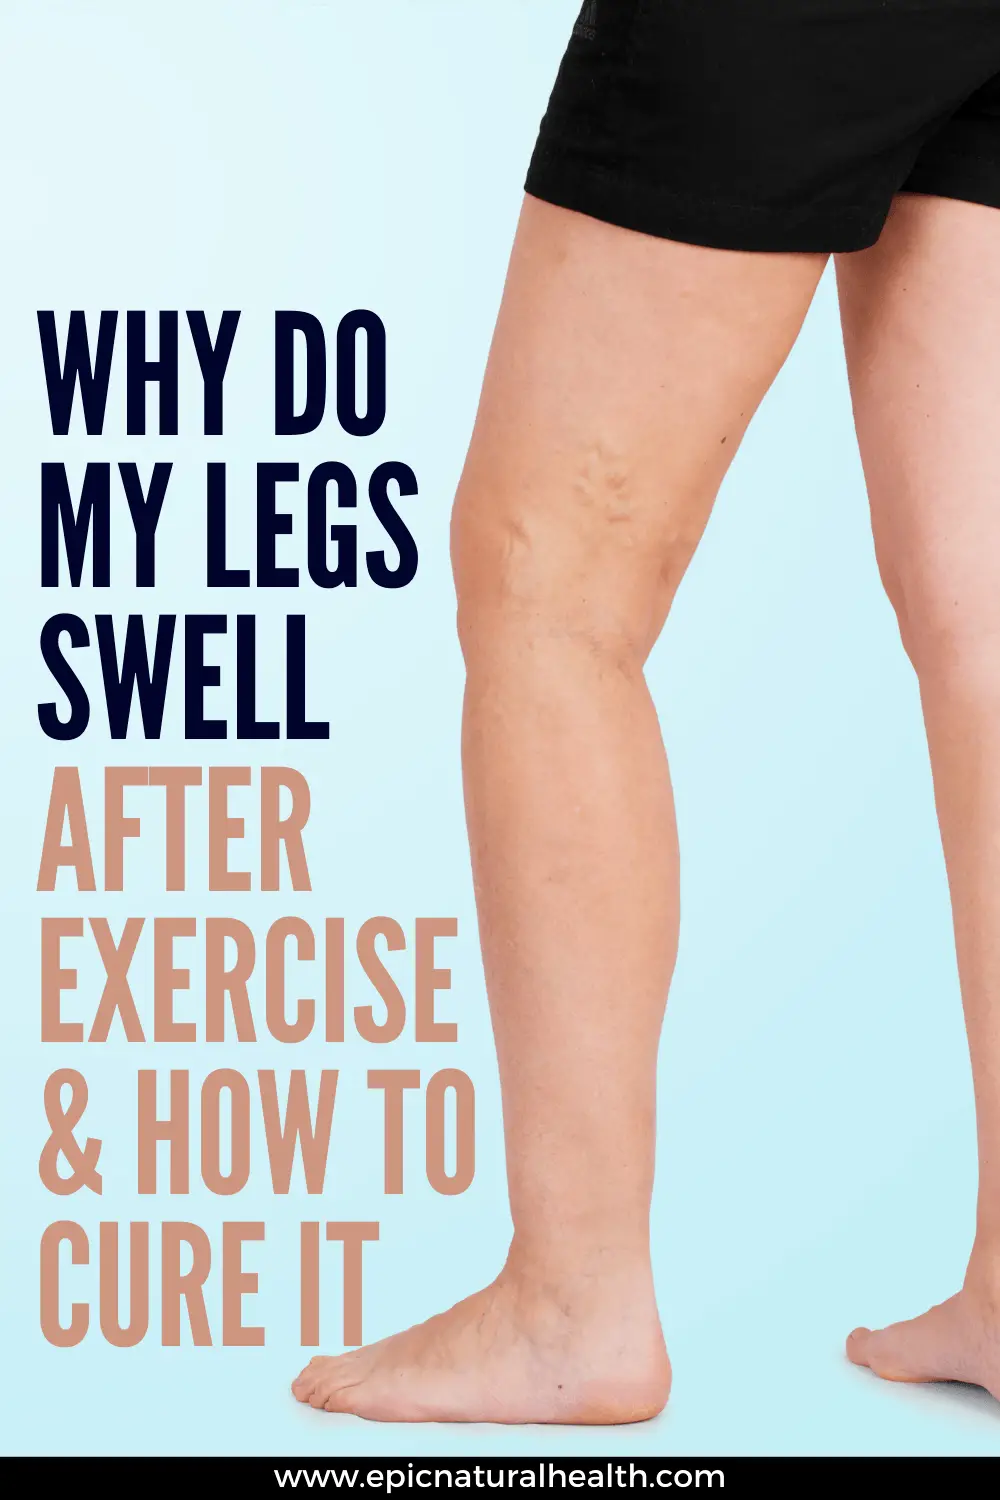 Why do my legs swell after exercise and how to cure it